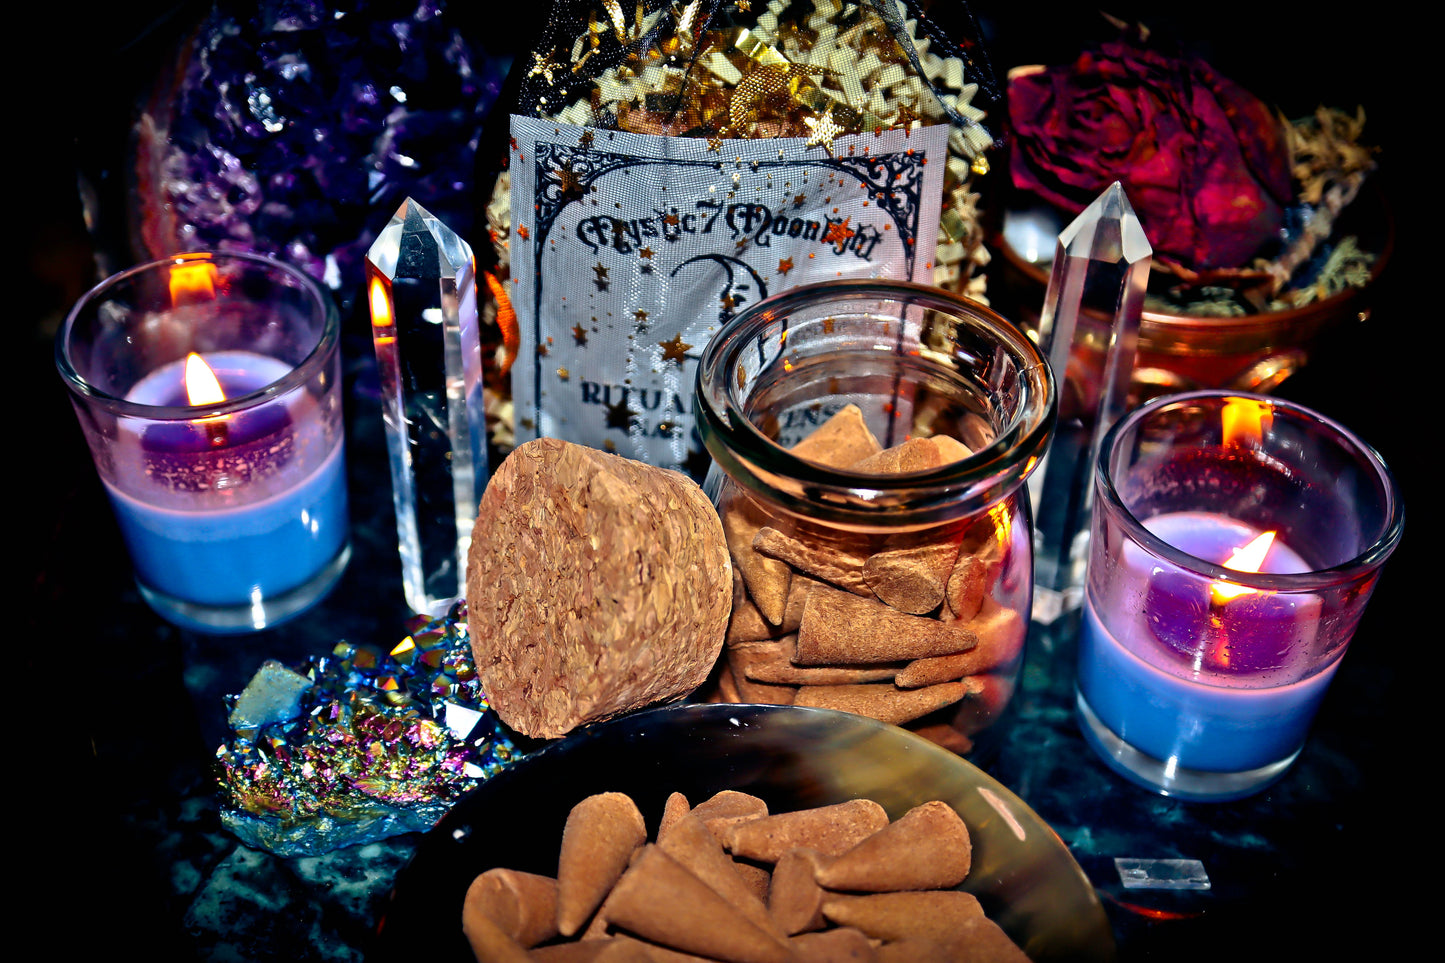 NAG CHAMPA Magick Ritual Incense ~ Amplify the Power of Spells & Wishes ~ Spirit Offering & More! 35 Cone Incense Premium Handmade Apothecary Glass Bottle w/ Cork